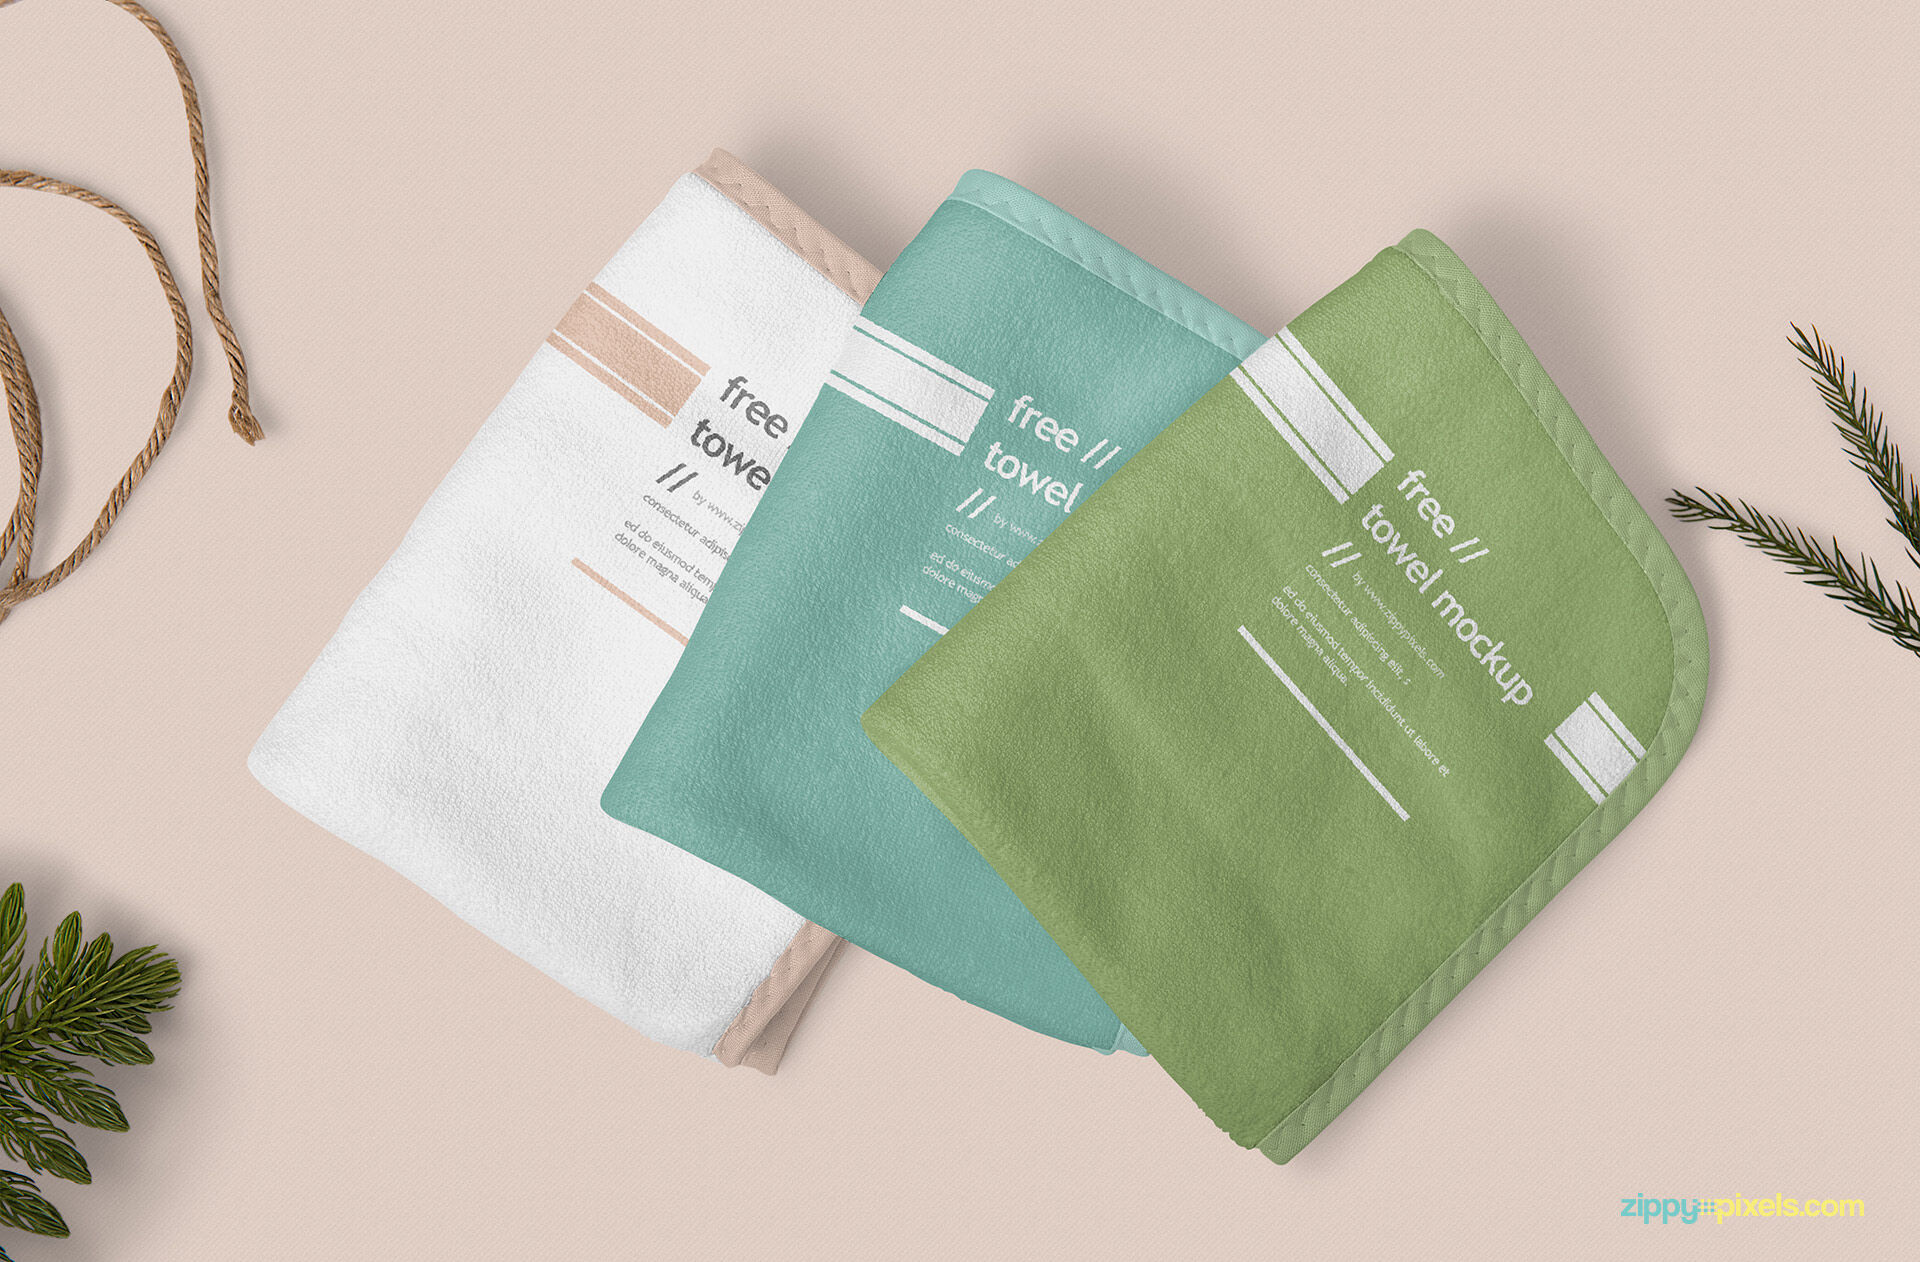 Mockup Featuring Three Hand Towels from Top View FREE PSD